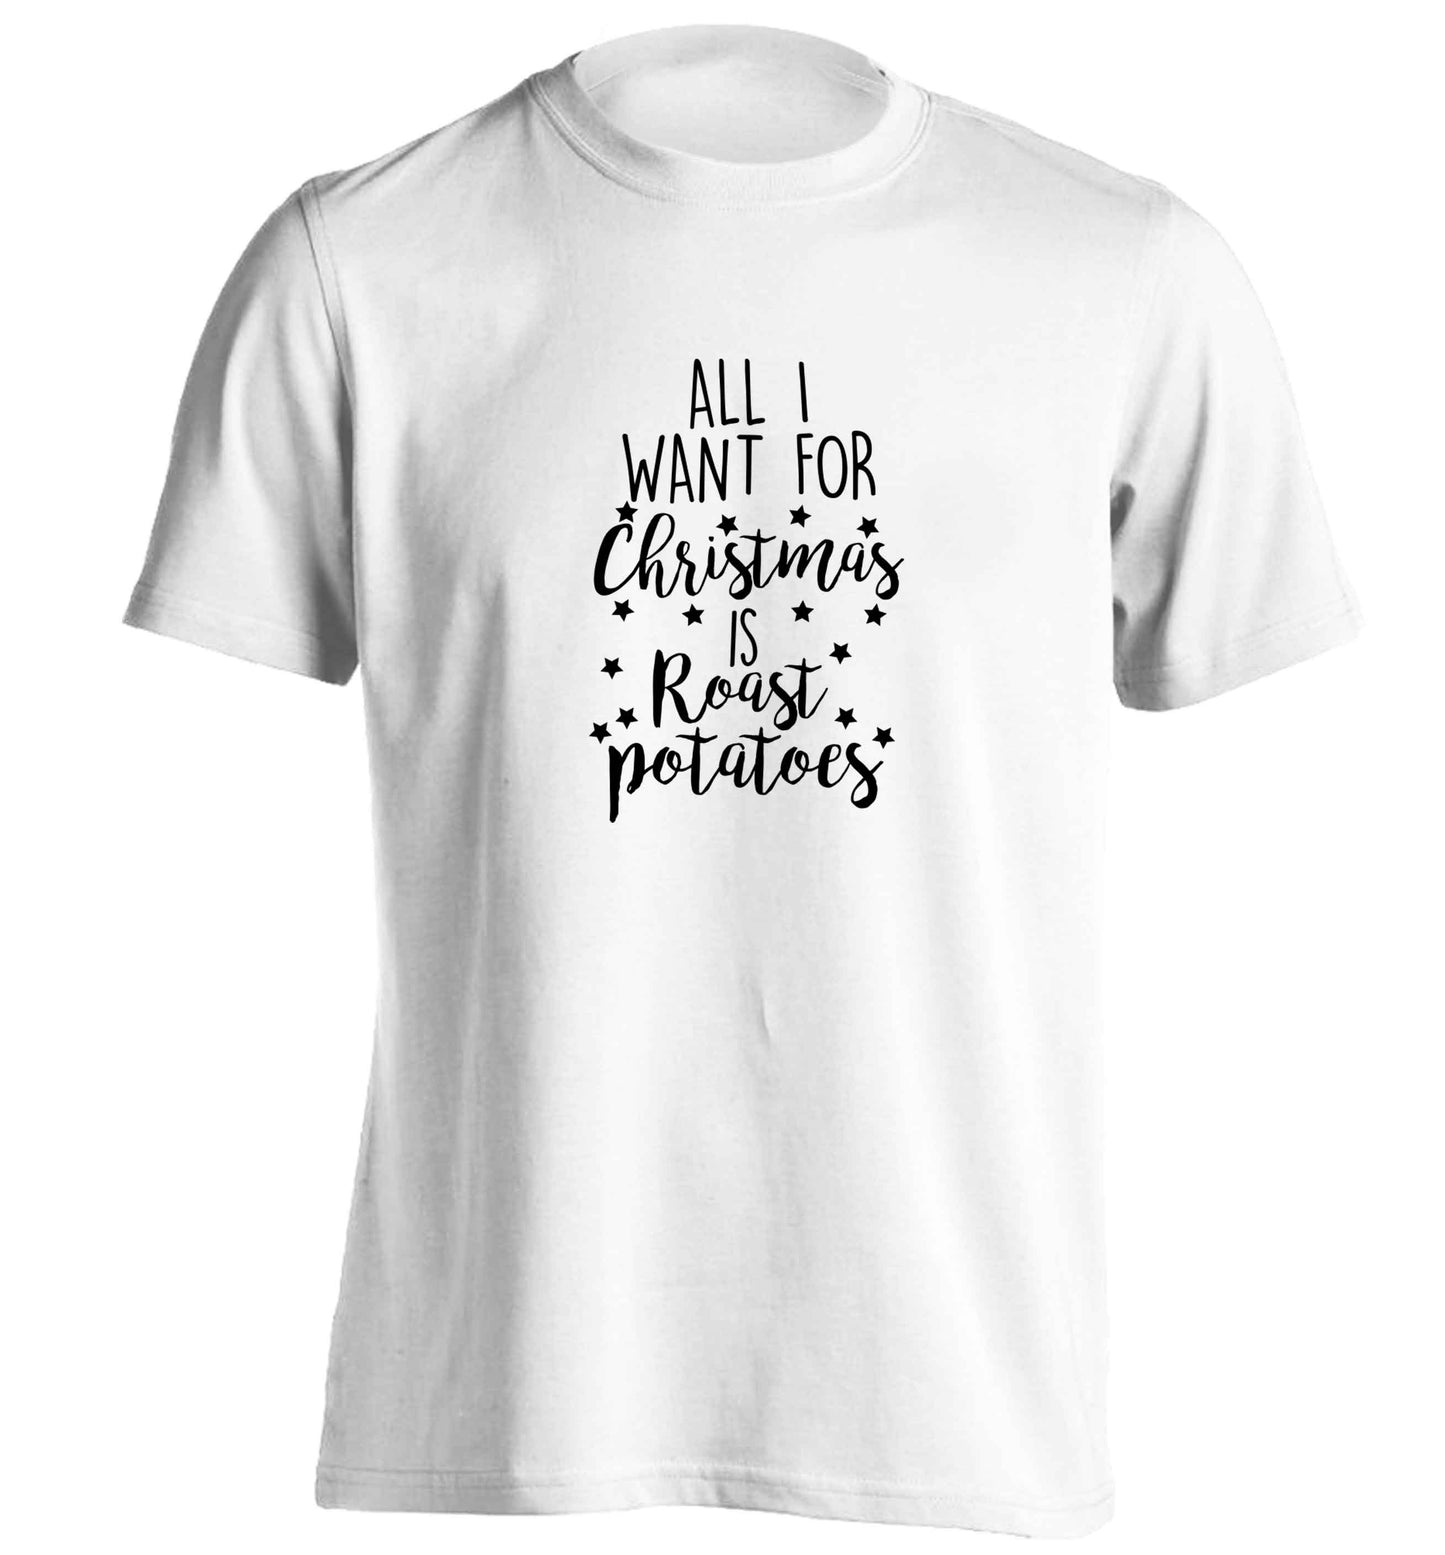 All I want for Christmas is roast potatoes adults unisex white Tshirt 2XL